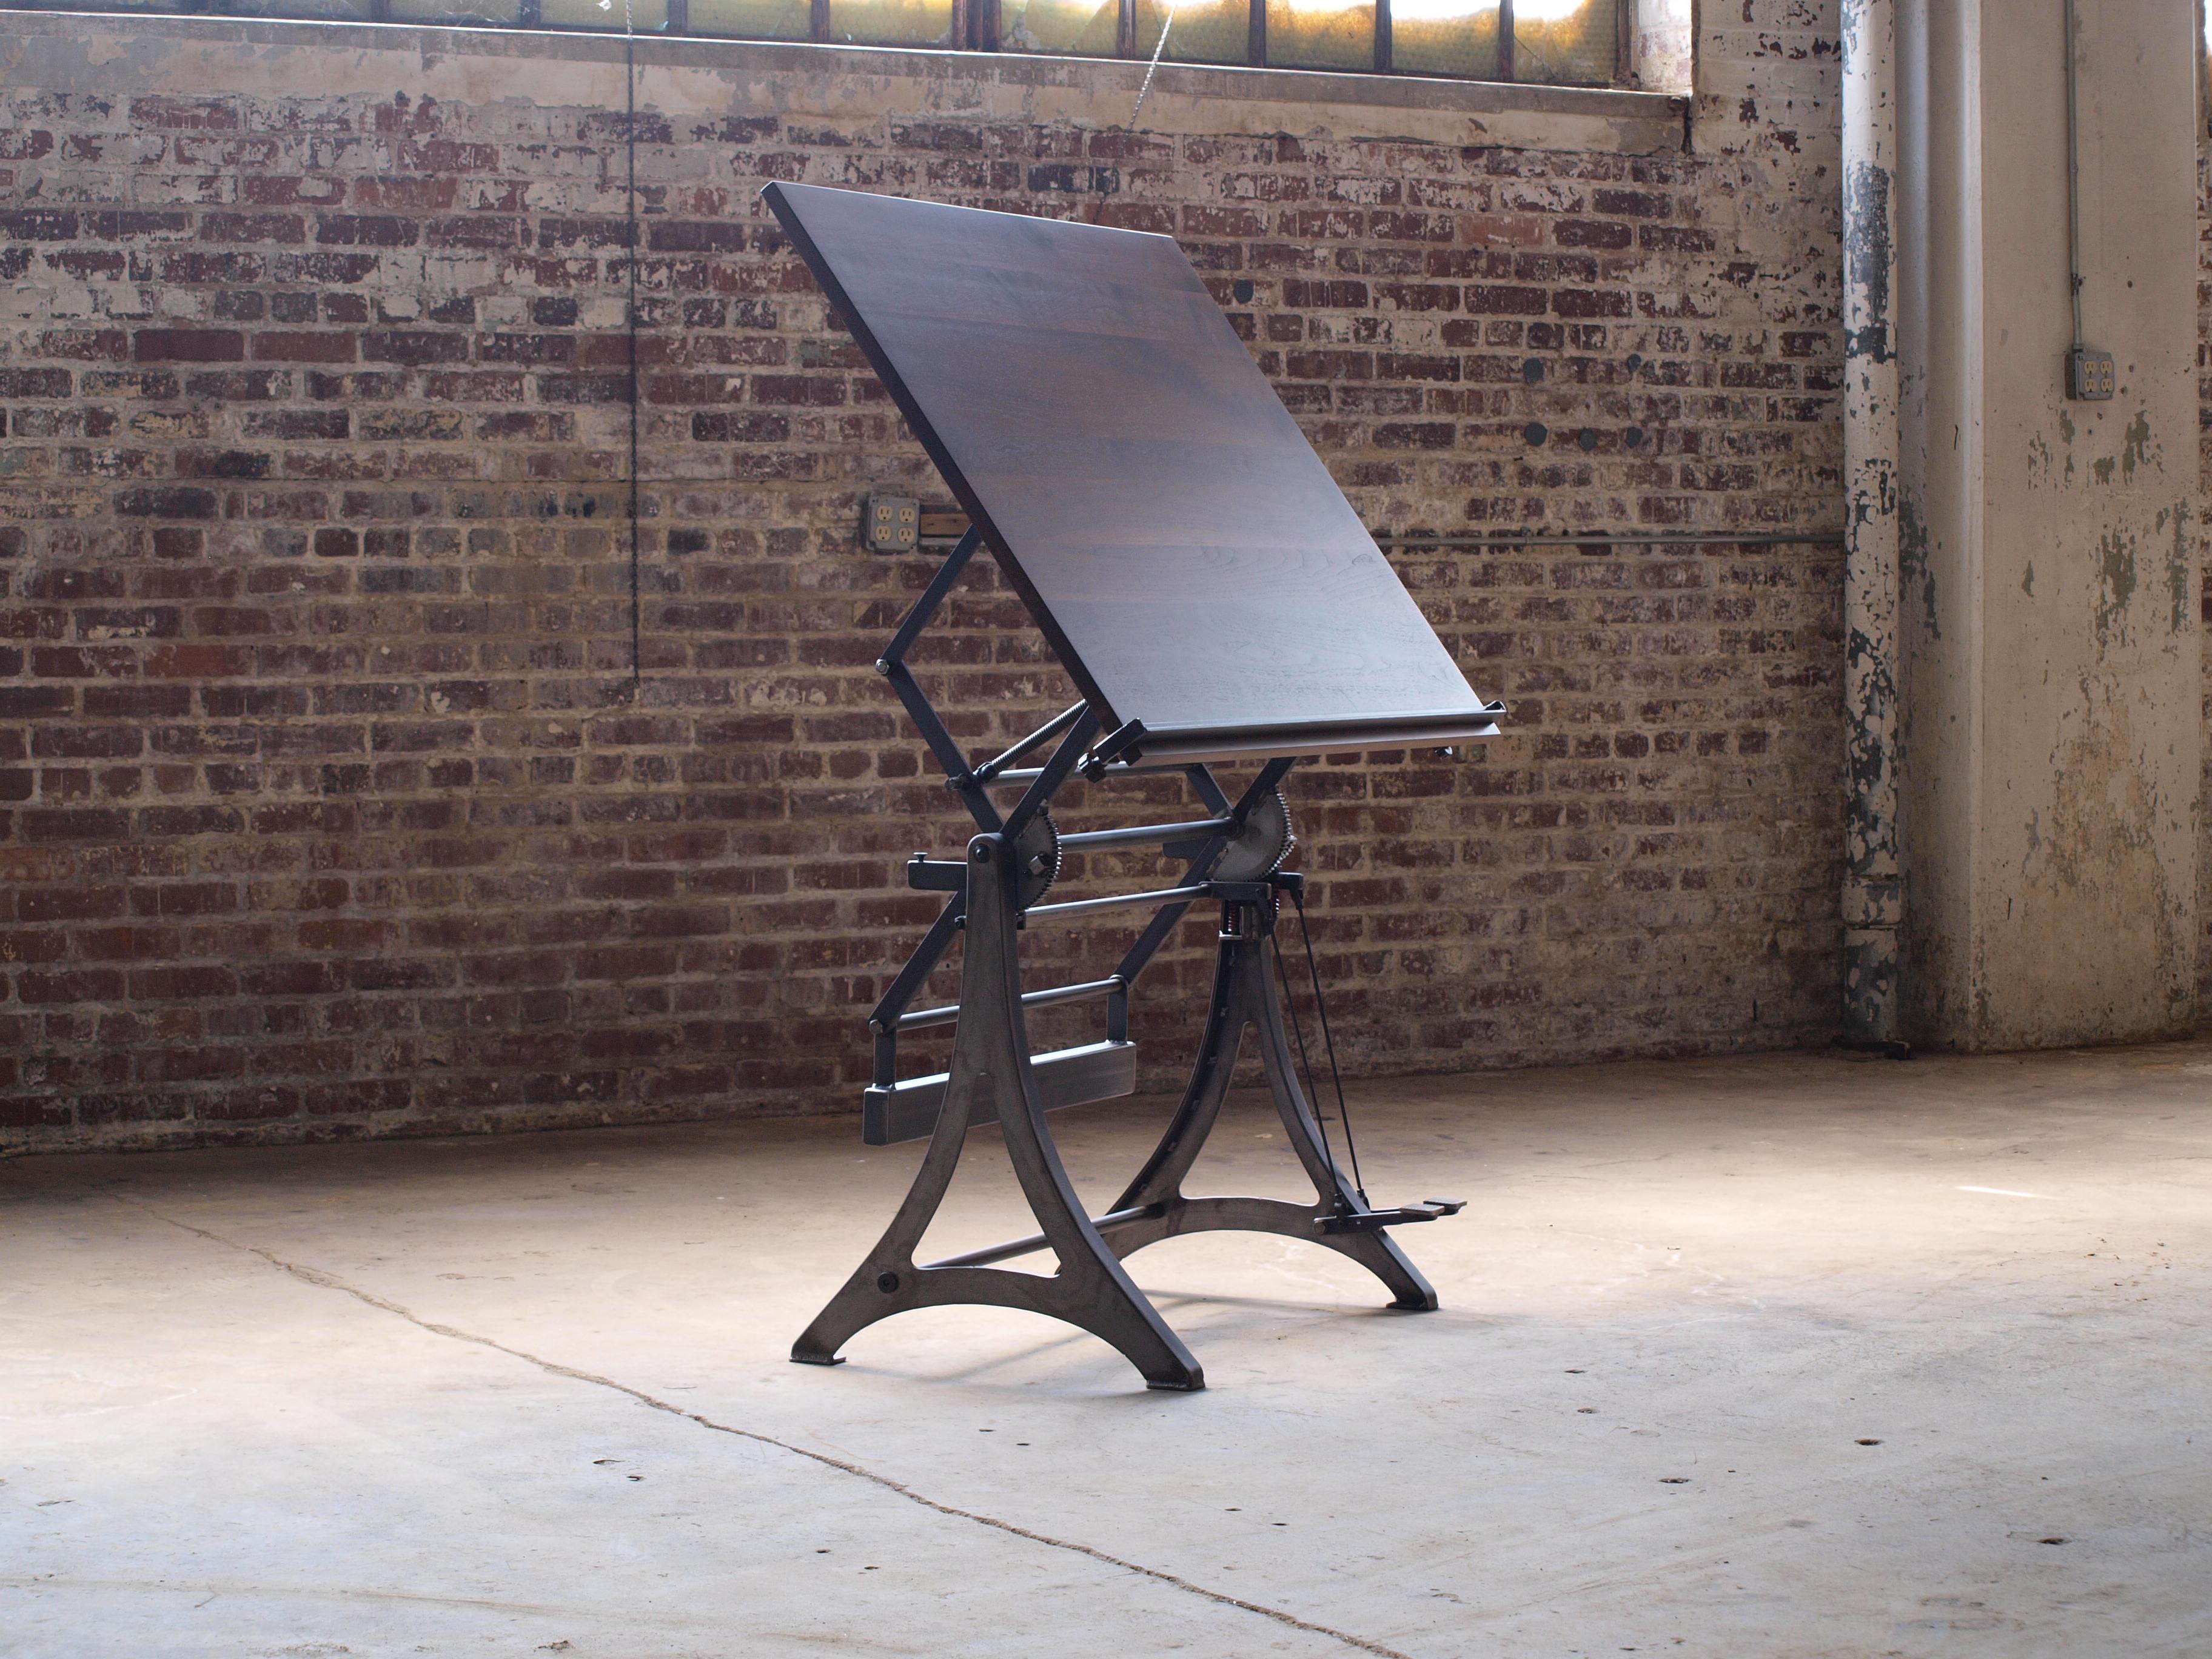 Handcrafted in Baltimore. This Marabu inspired, custom-crafted drafting table is a fully functional piece. It boasts an adjustable height and tilt feature that effortlessly adjusts via a counterbalanced system. The tabletop is crafted from solid